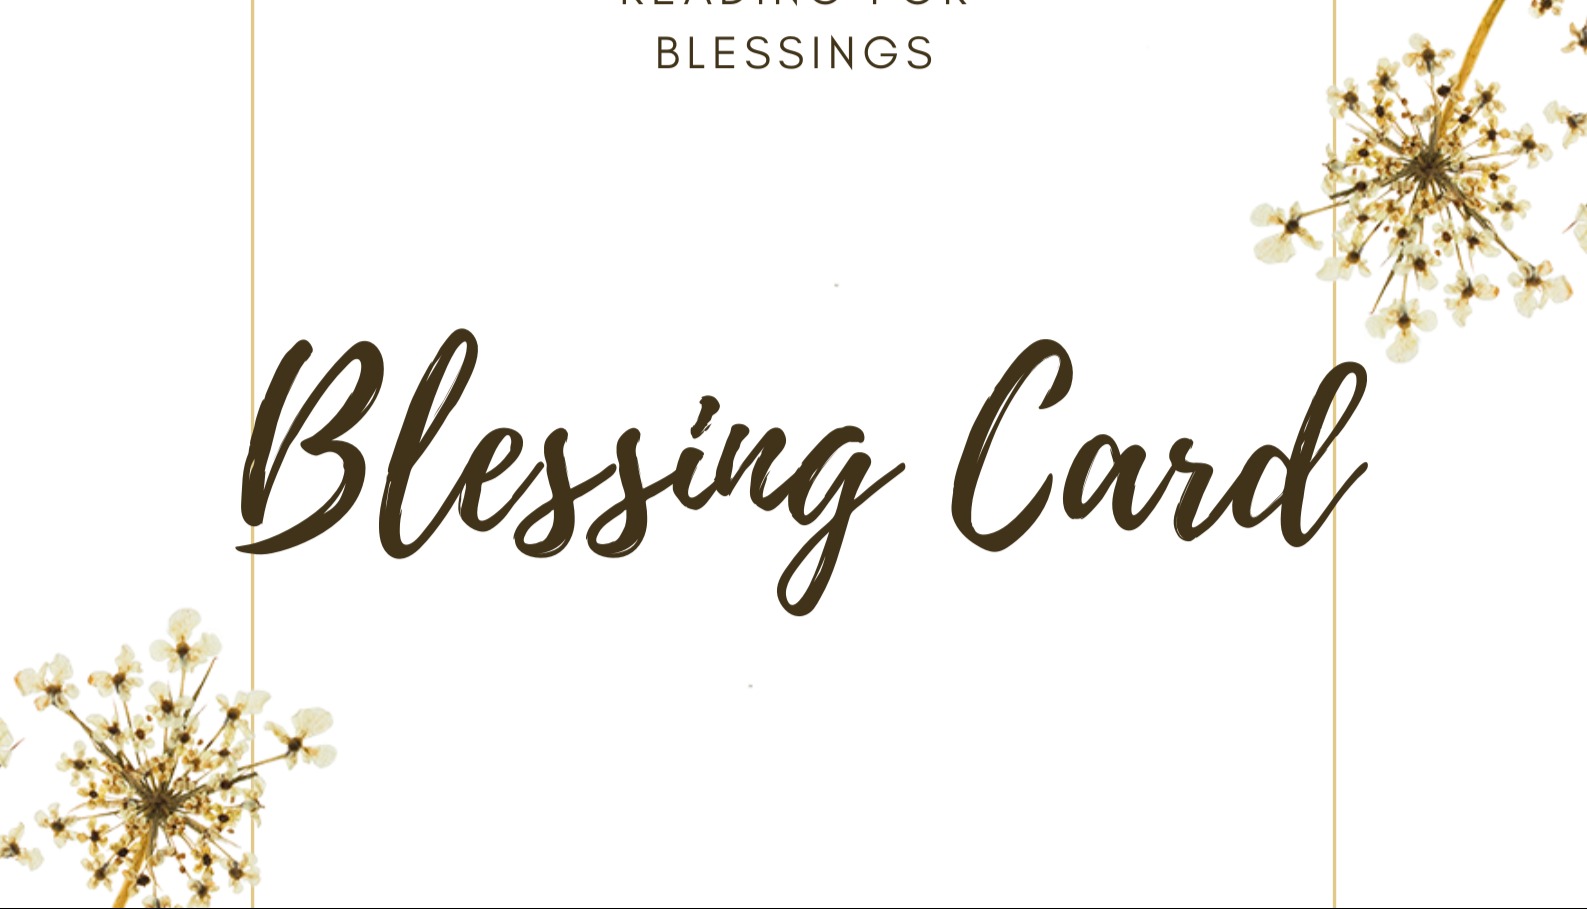 Cartomancy Reading for blessing card